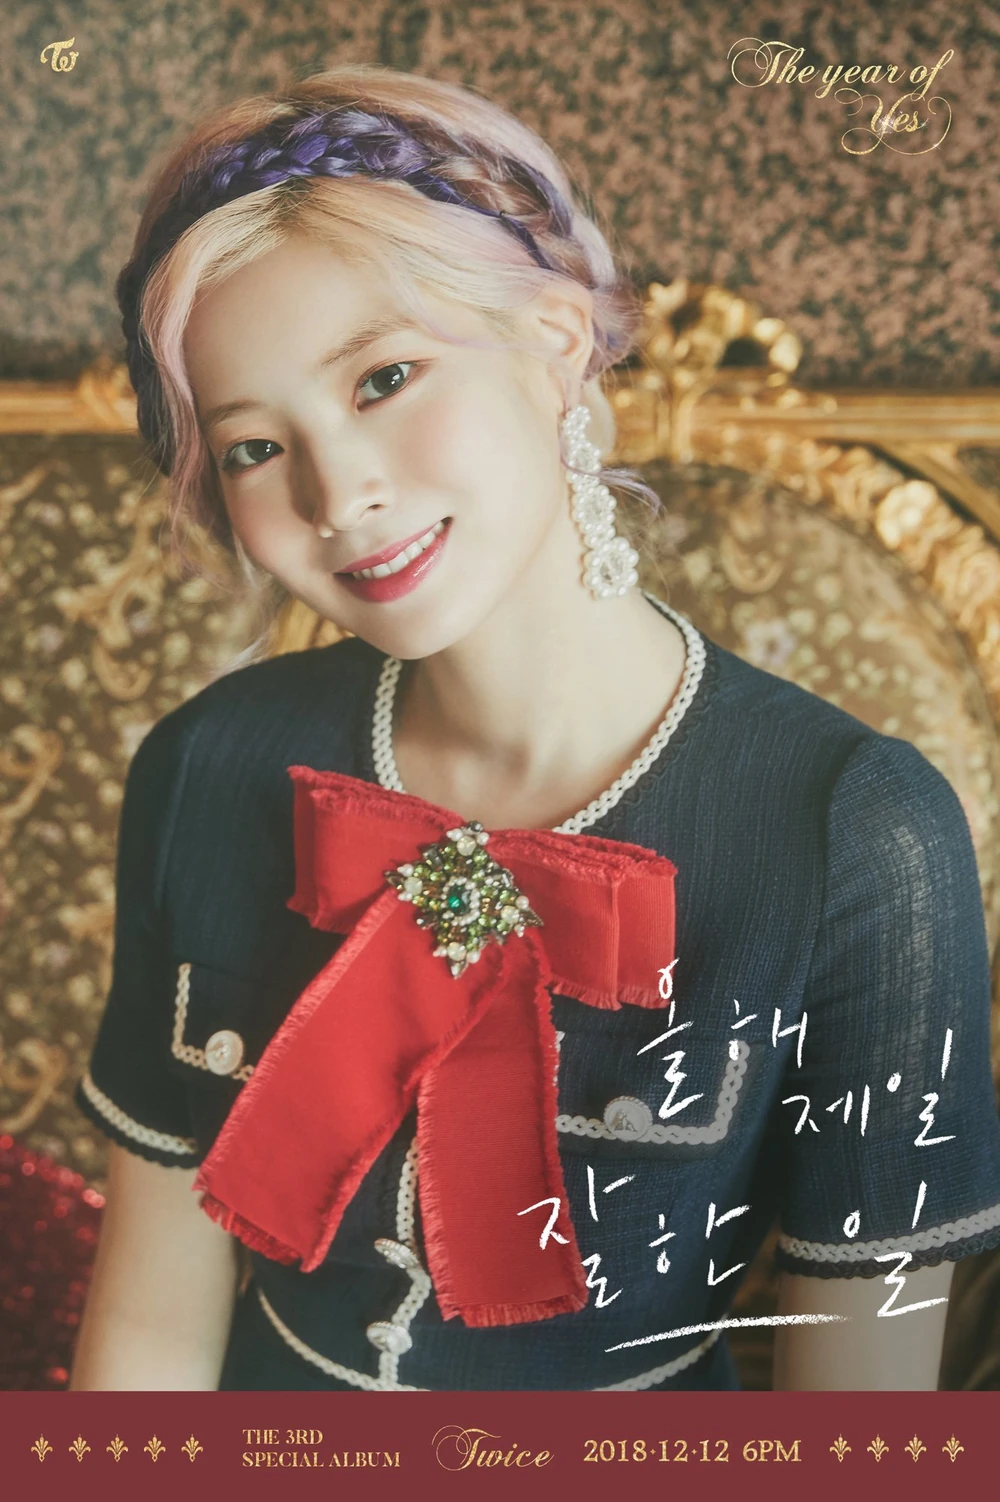 Twice Year Of Yes Dahyun Concept Teaser Picture Image Photo Kpop K-Concept 1